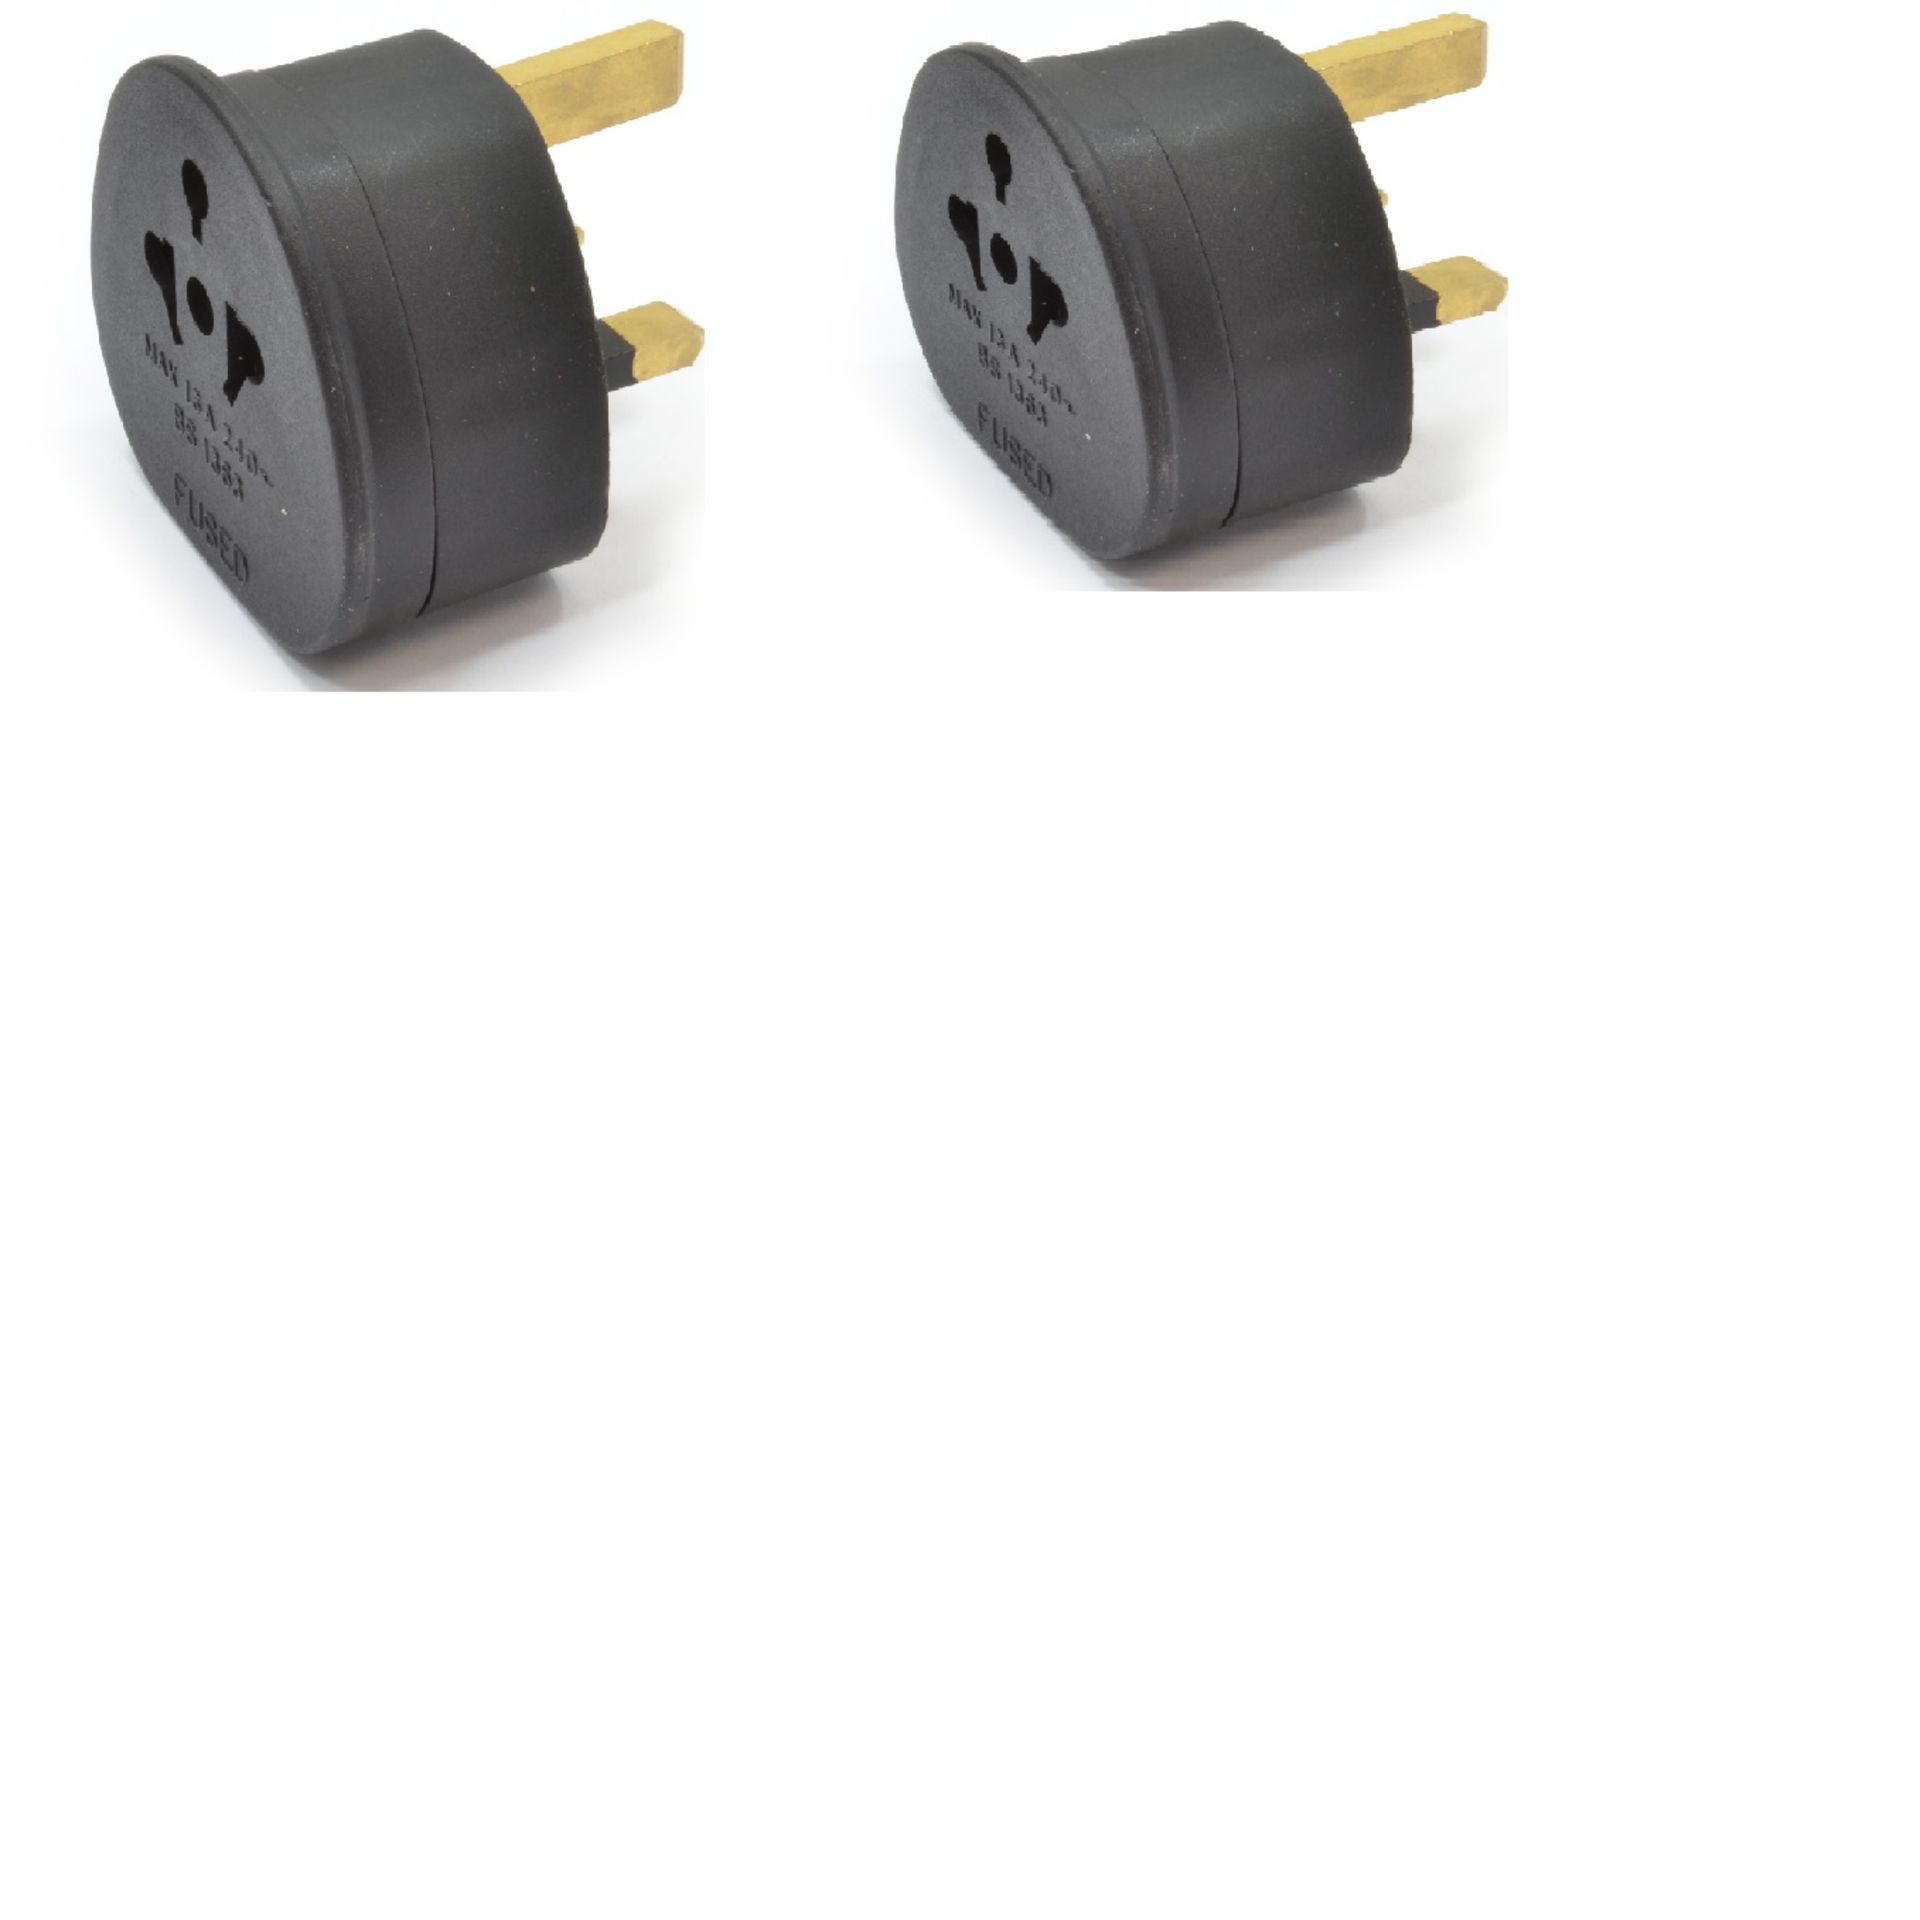 V *TRADE QTY* Brand New A Lot Of Two SMJ Electrical UK & Ireland Plug Adaptor X 3 YOUR BID PRICE